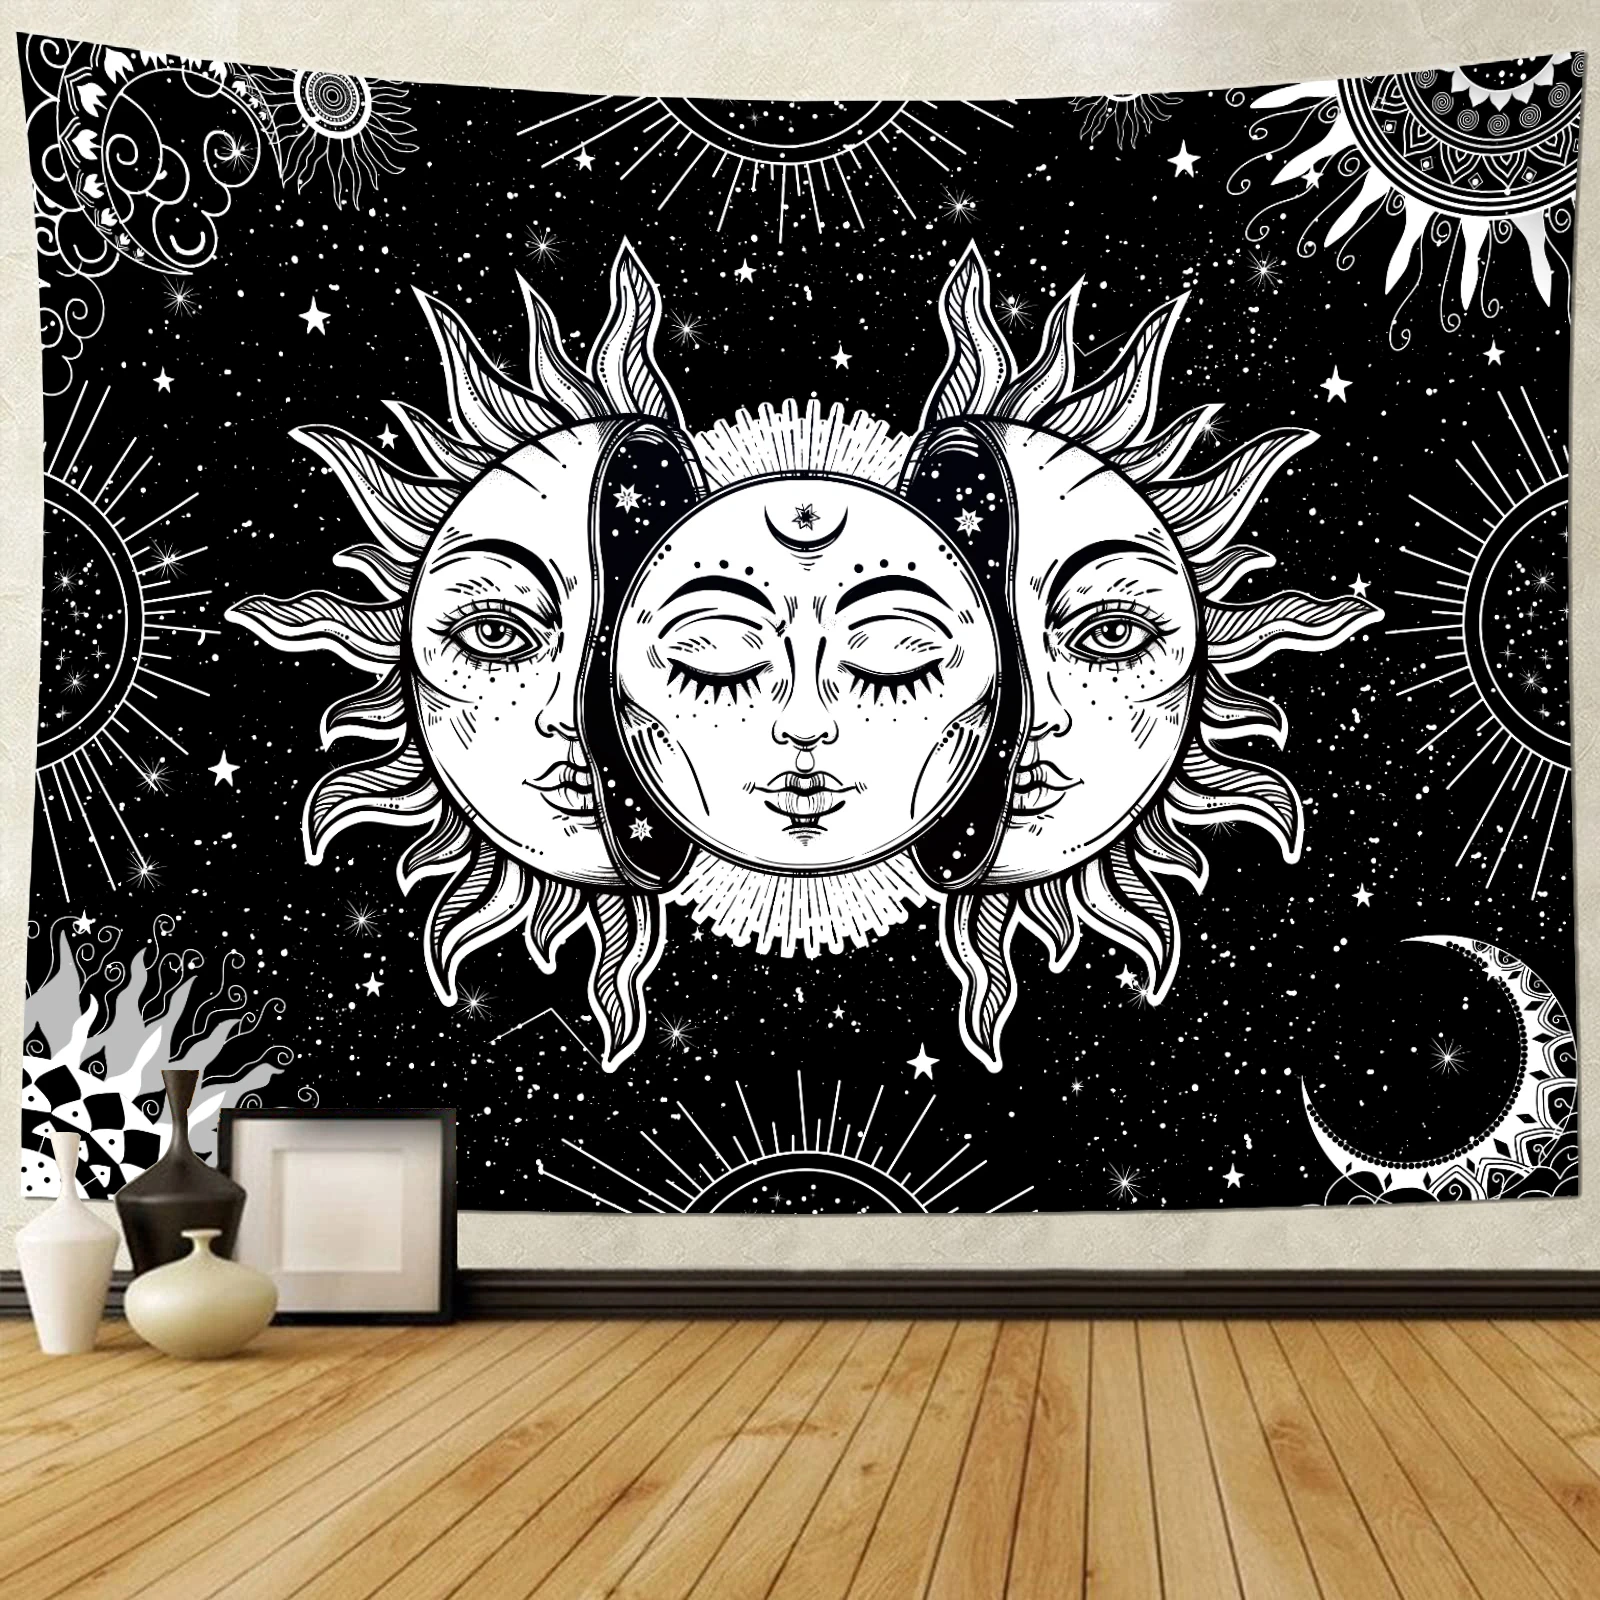 

Sun and Moon Tapestry Burning Sun with Stars Psychedelic Black White Indie Popular Mystic Wall Hanging for Bedroom Aesthetic